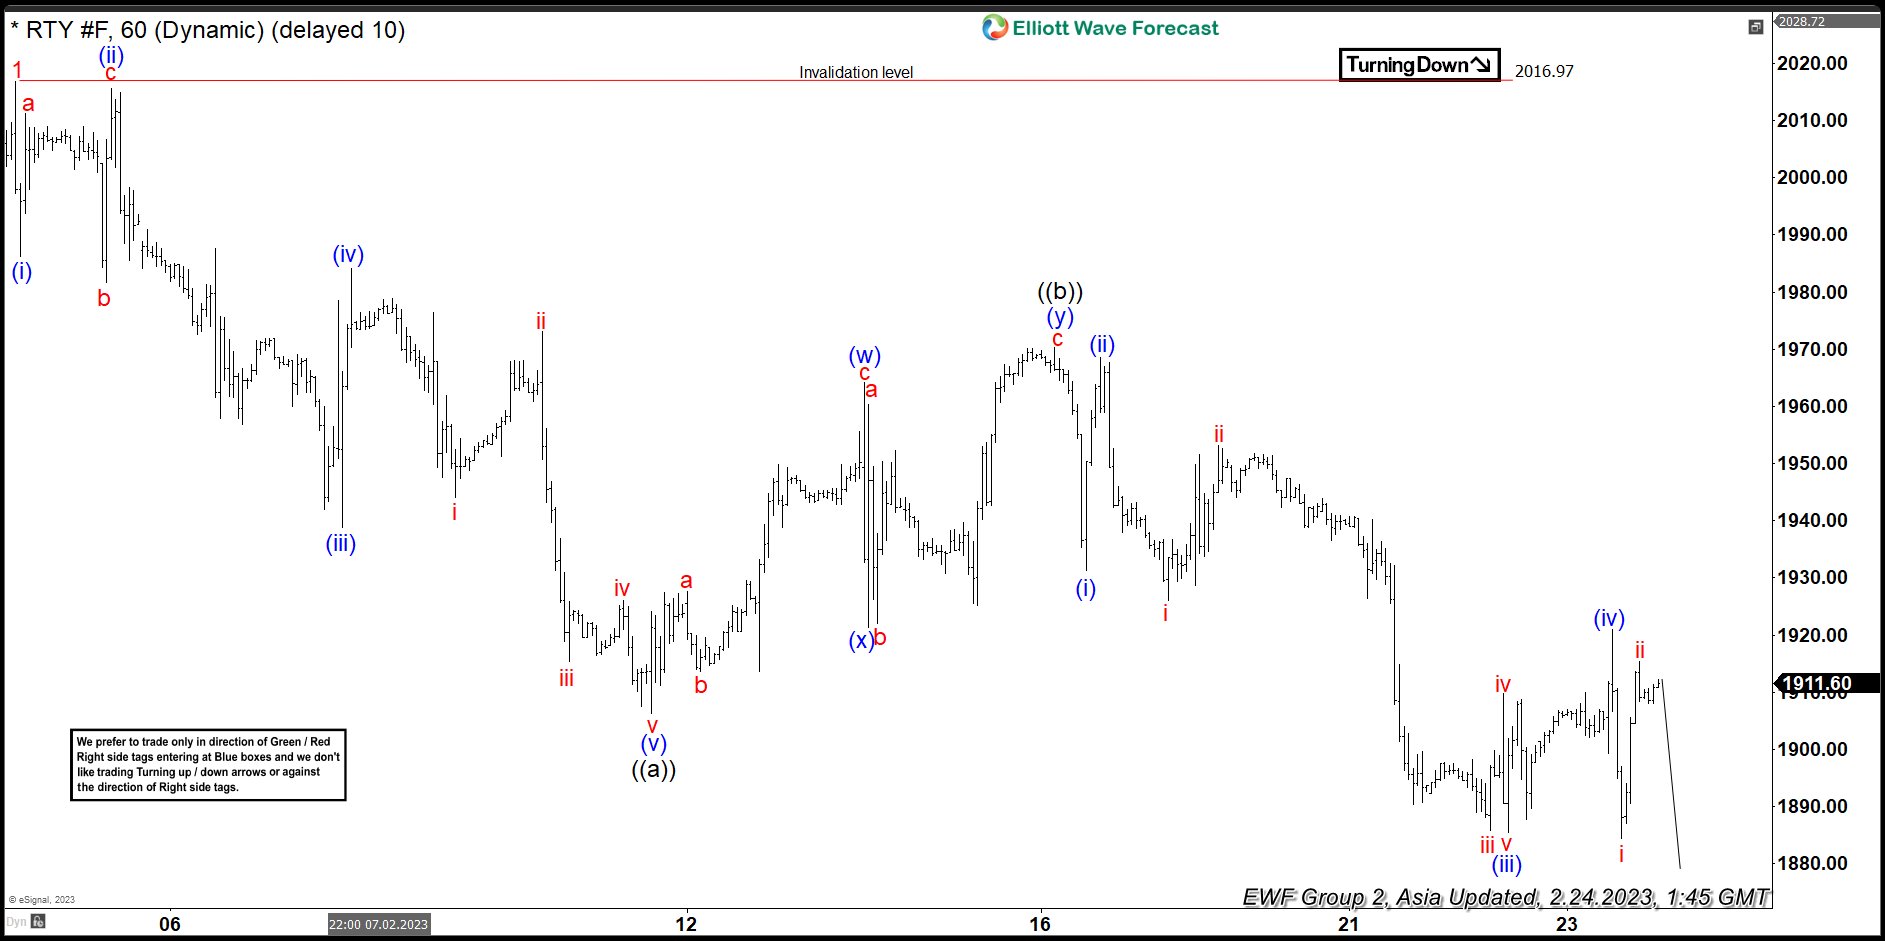 Elliott Wave Projects Russell (RTY) Should Resume Higher